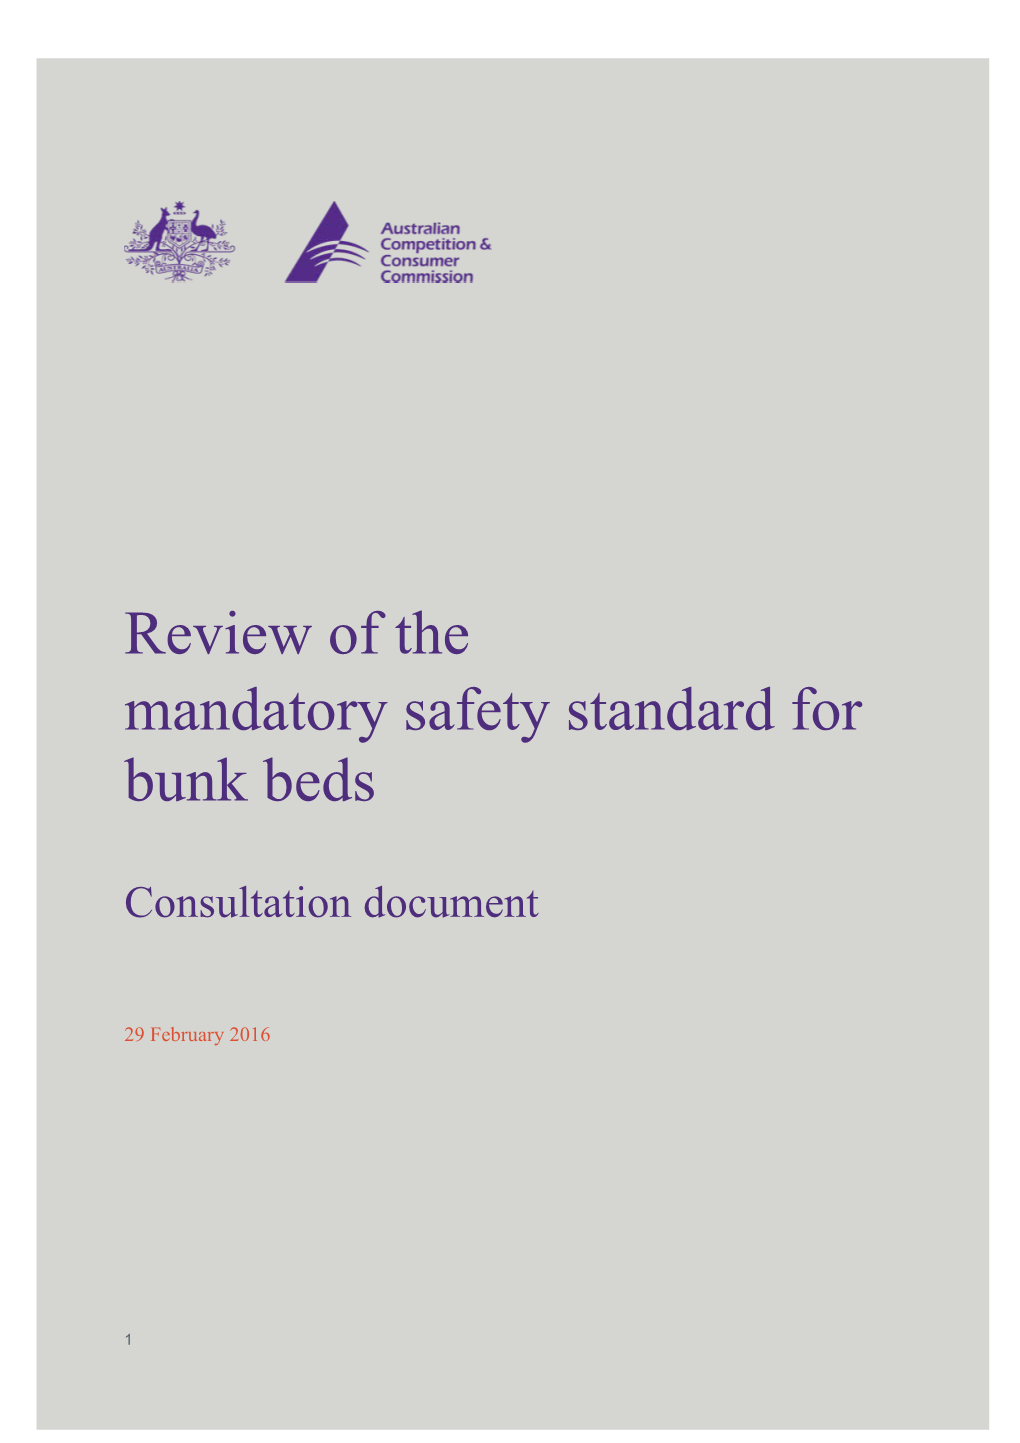 The ACCC Is Reviewing the Mandatory Safety Standard That Sets out Minimum Requirements